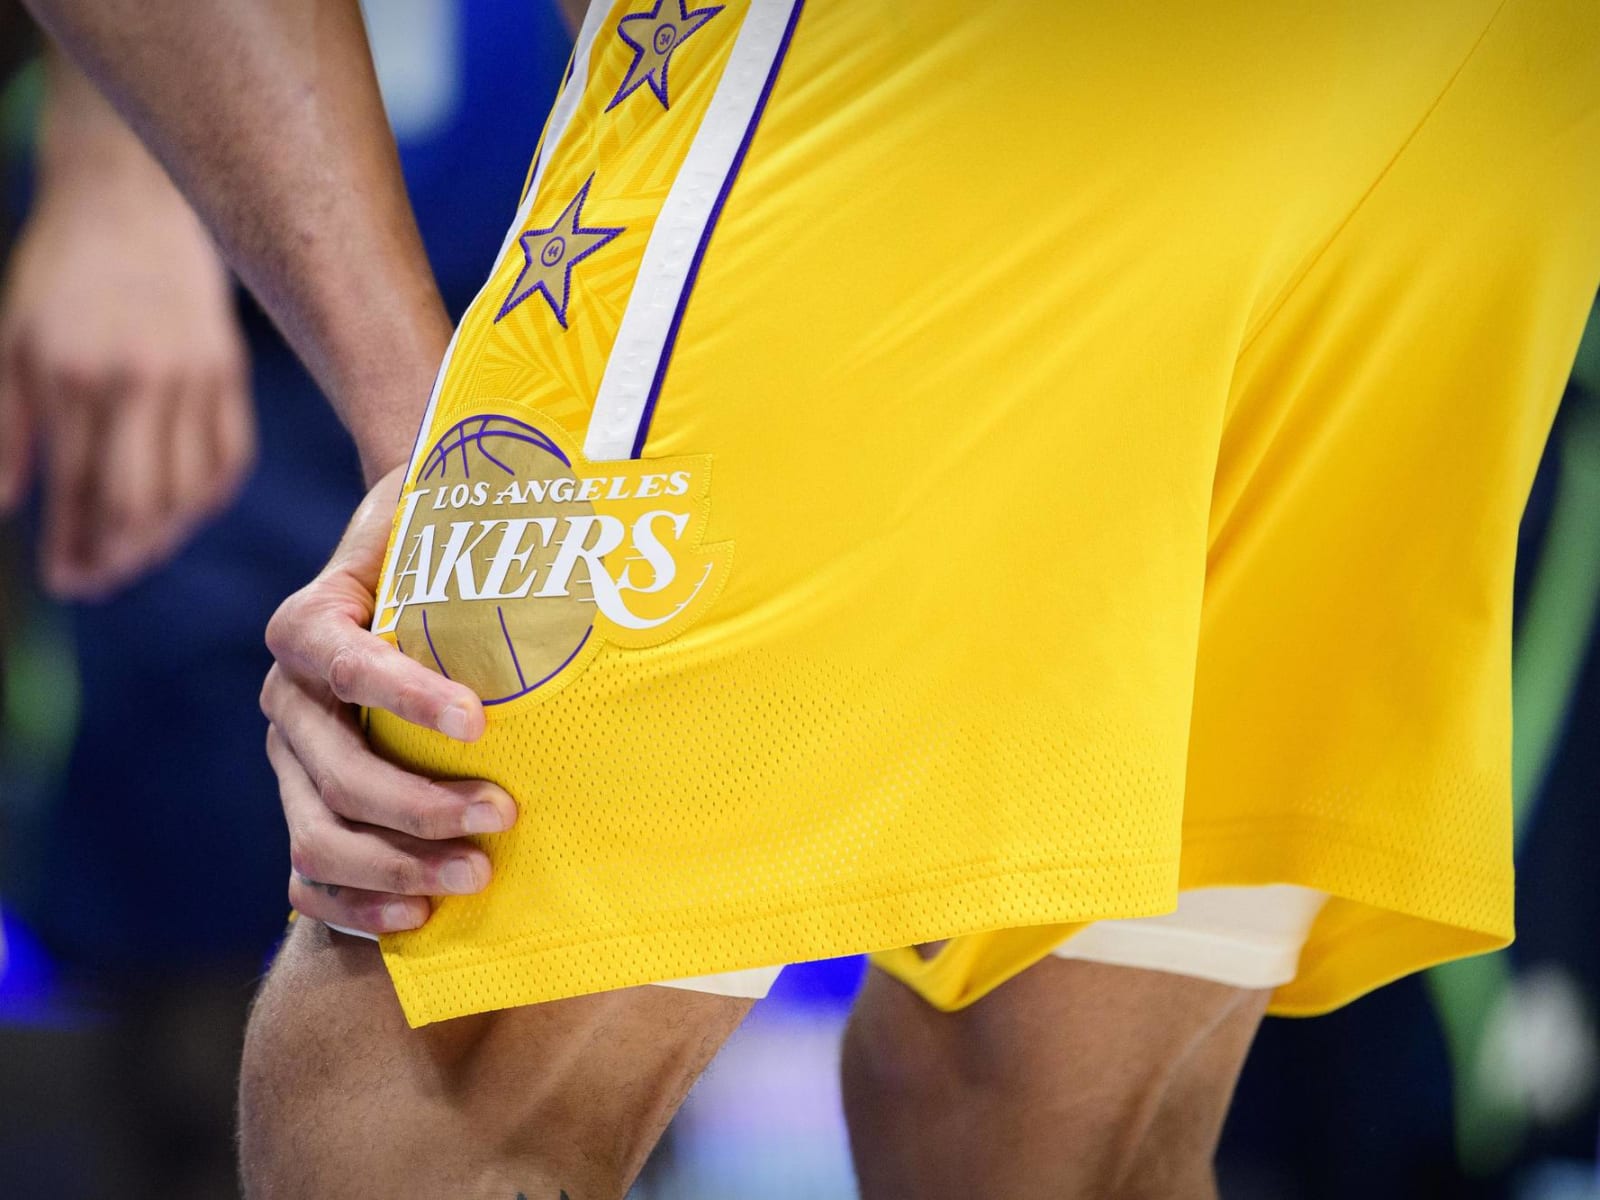 Los Angeles Lakers sign with Wish as jersey ad patch sponsor